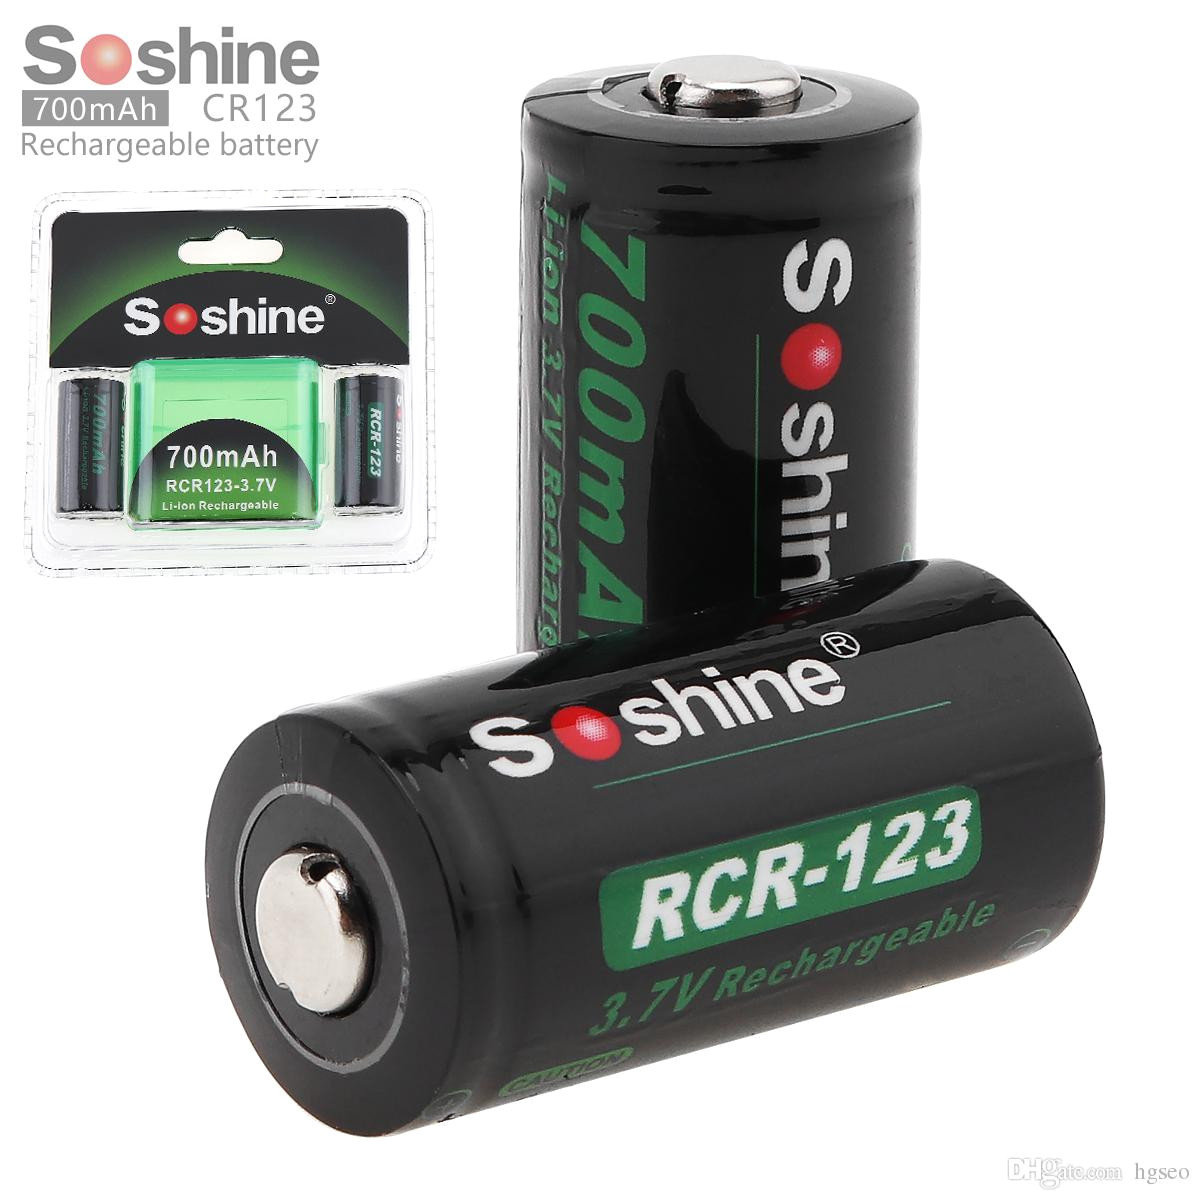 brand new soshine rcr 123 16340 700mah li ion rechargeable battery with battery case lfa 201 lr41 battery battery acid from hgseo 4 95 dhgate com